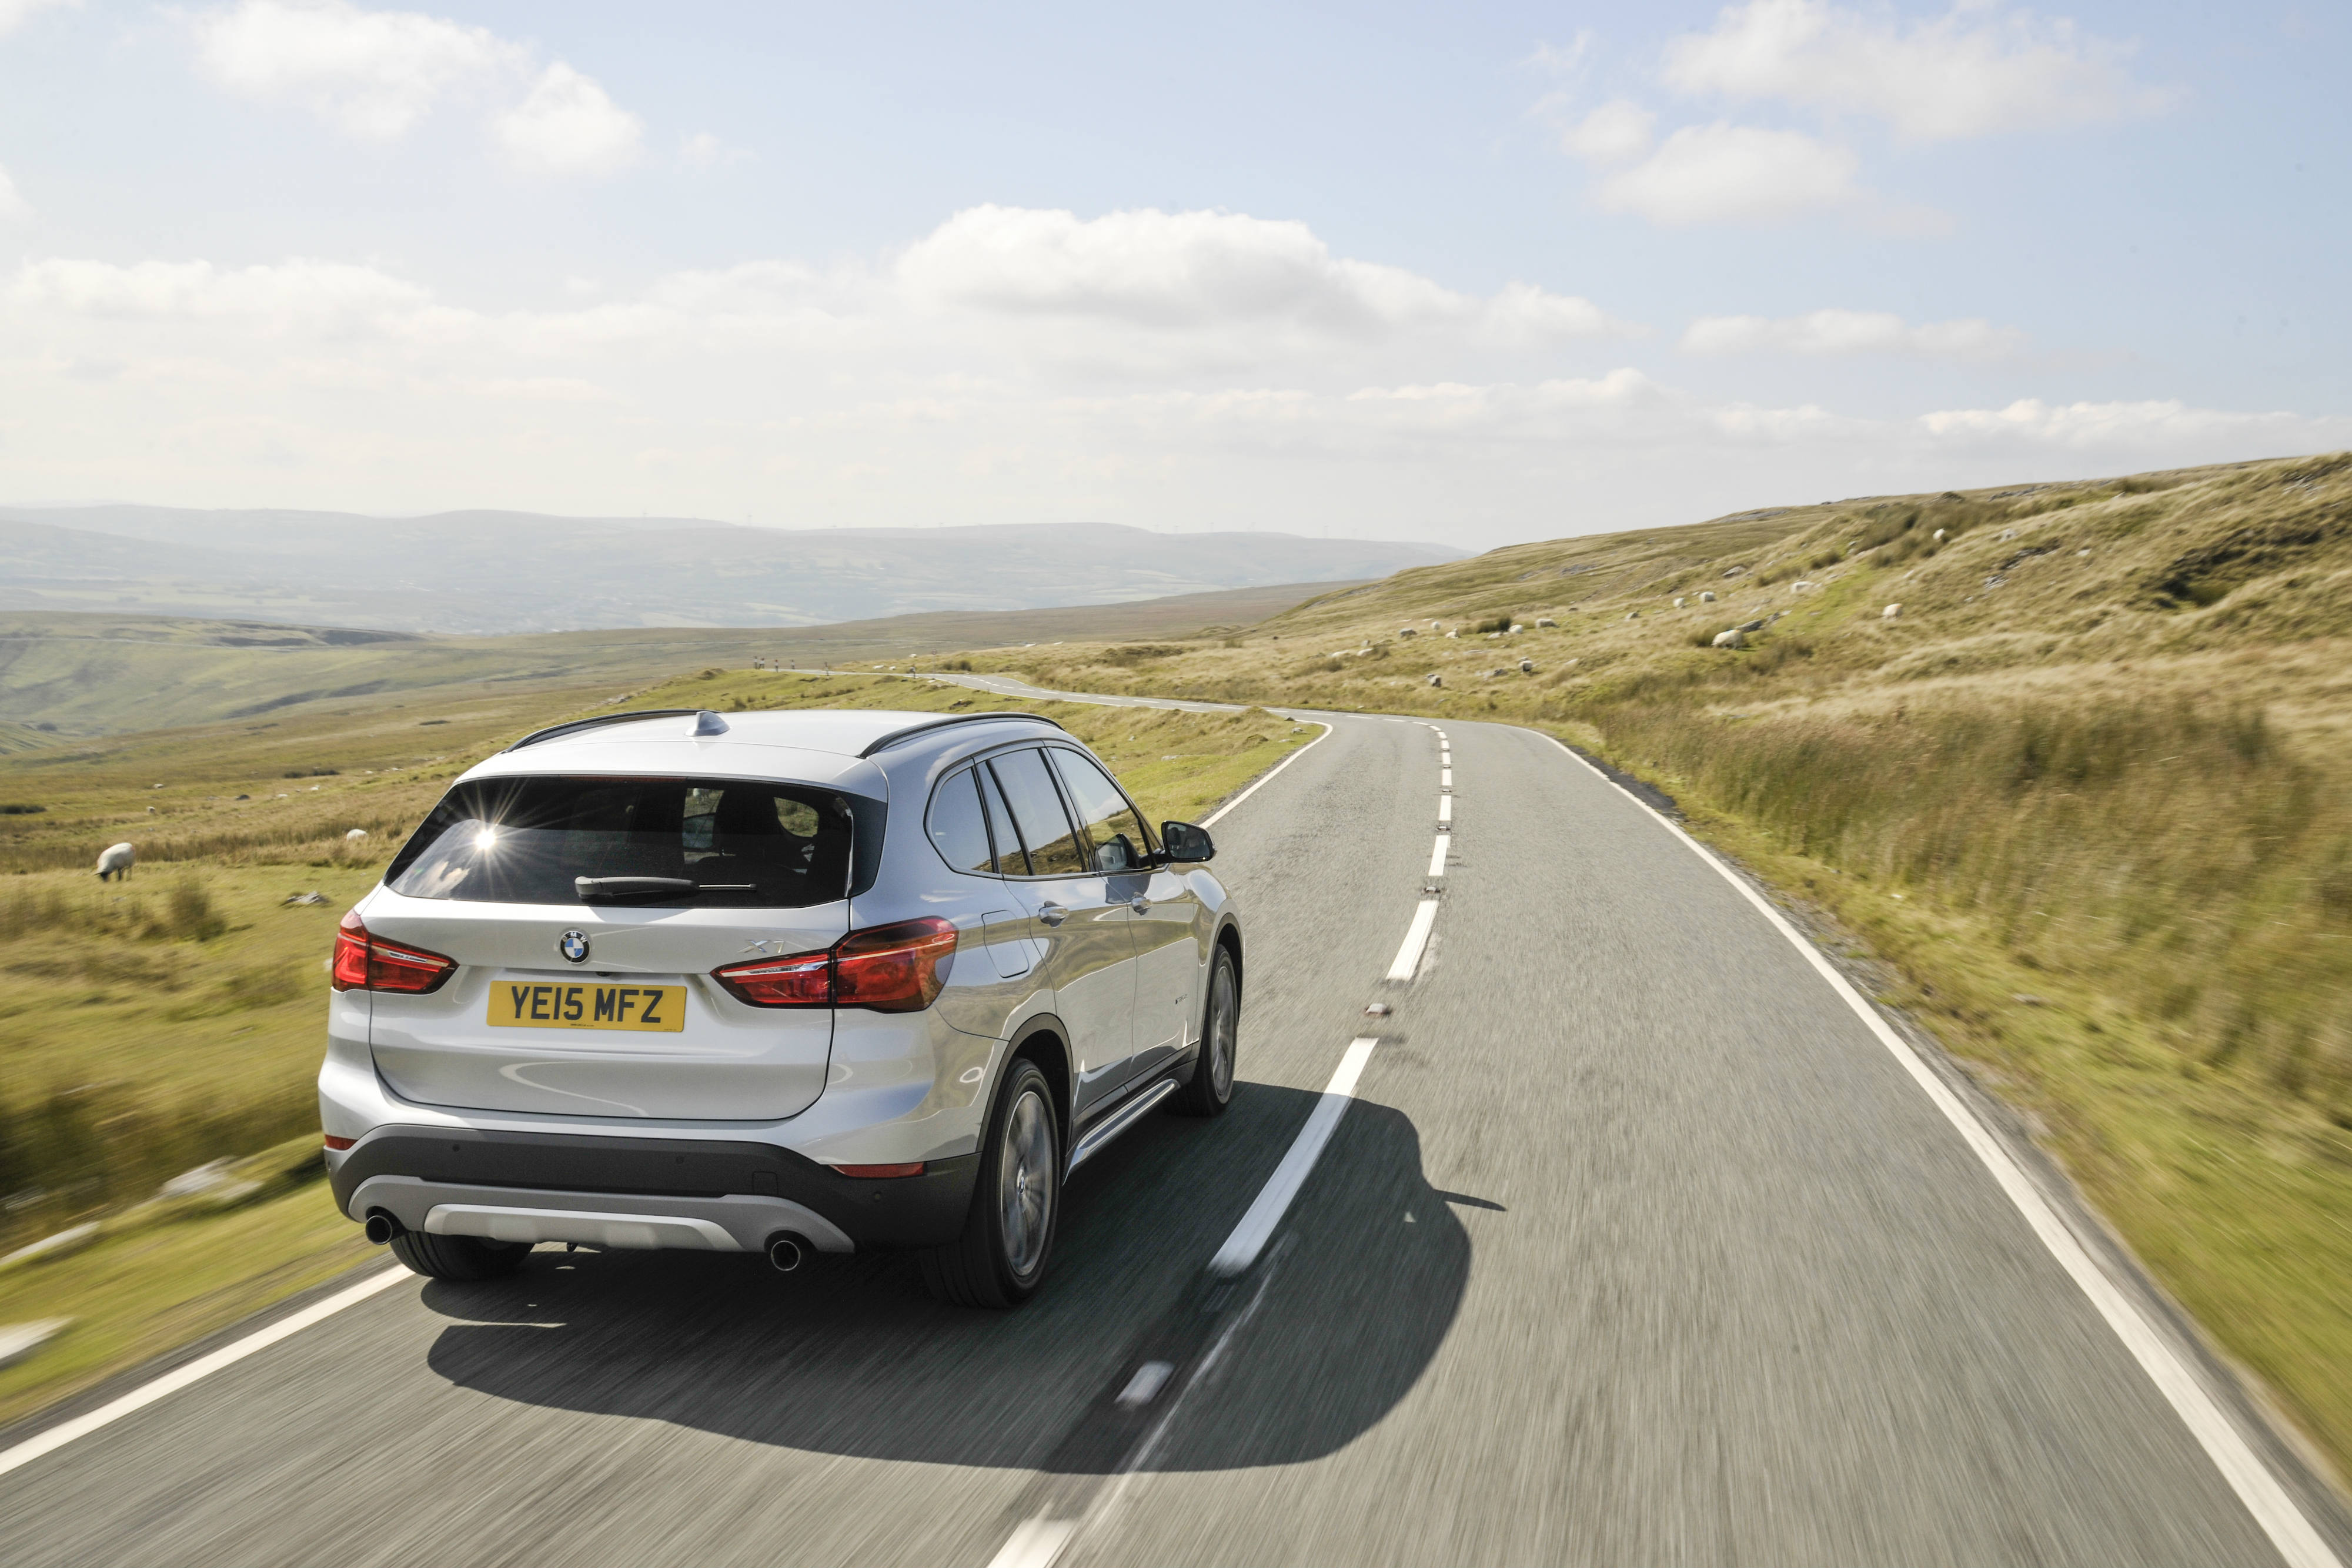 Good to drive: 2015 BMW X1 review by The Sunday Times Driving